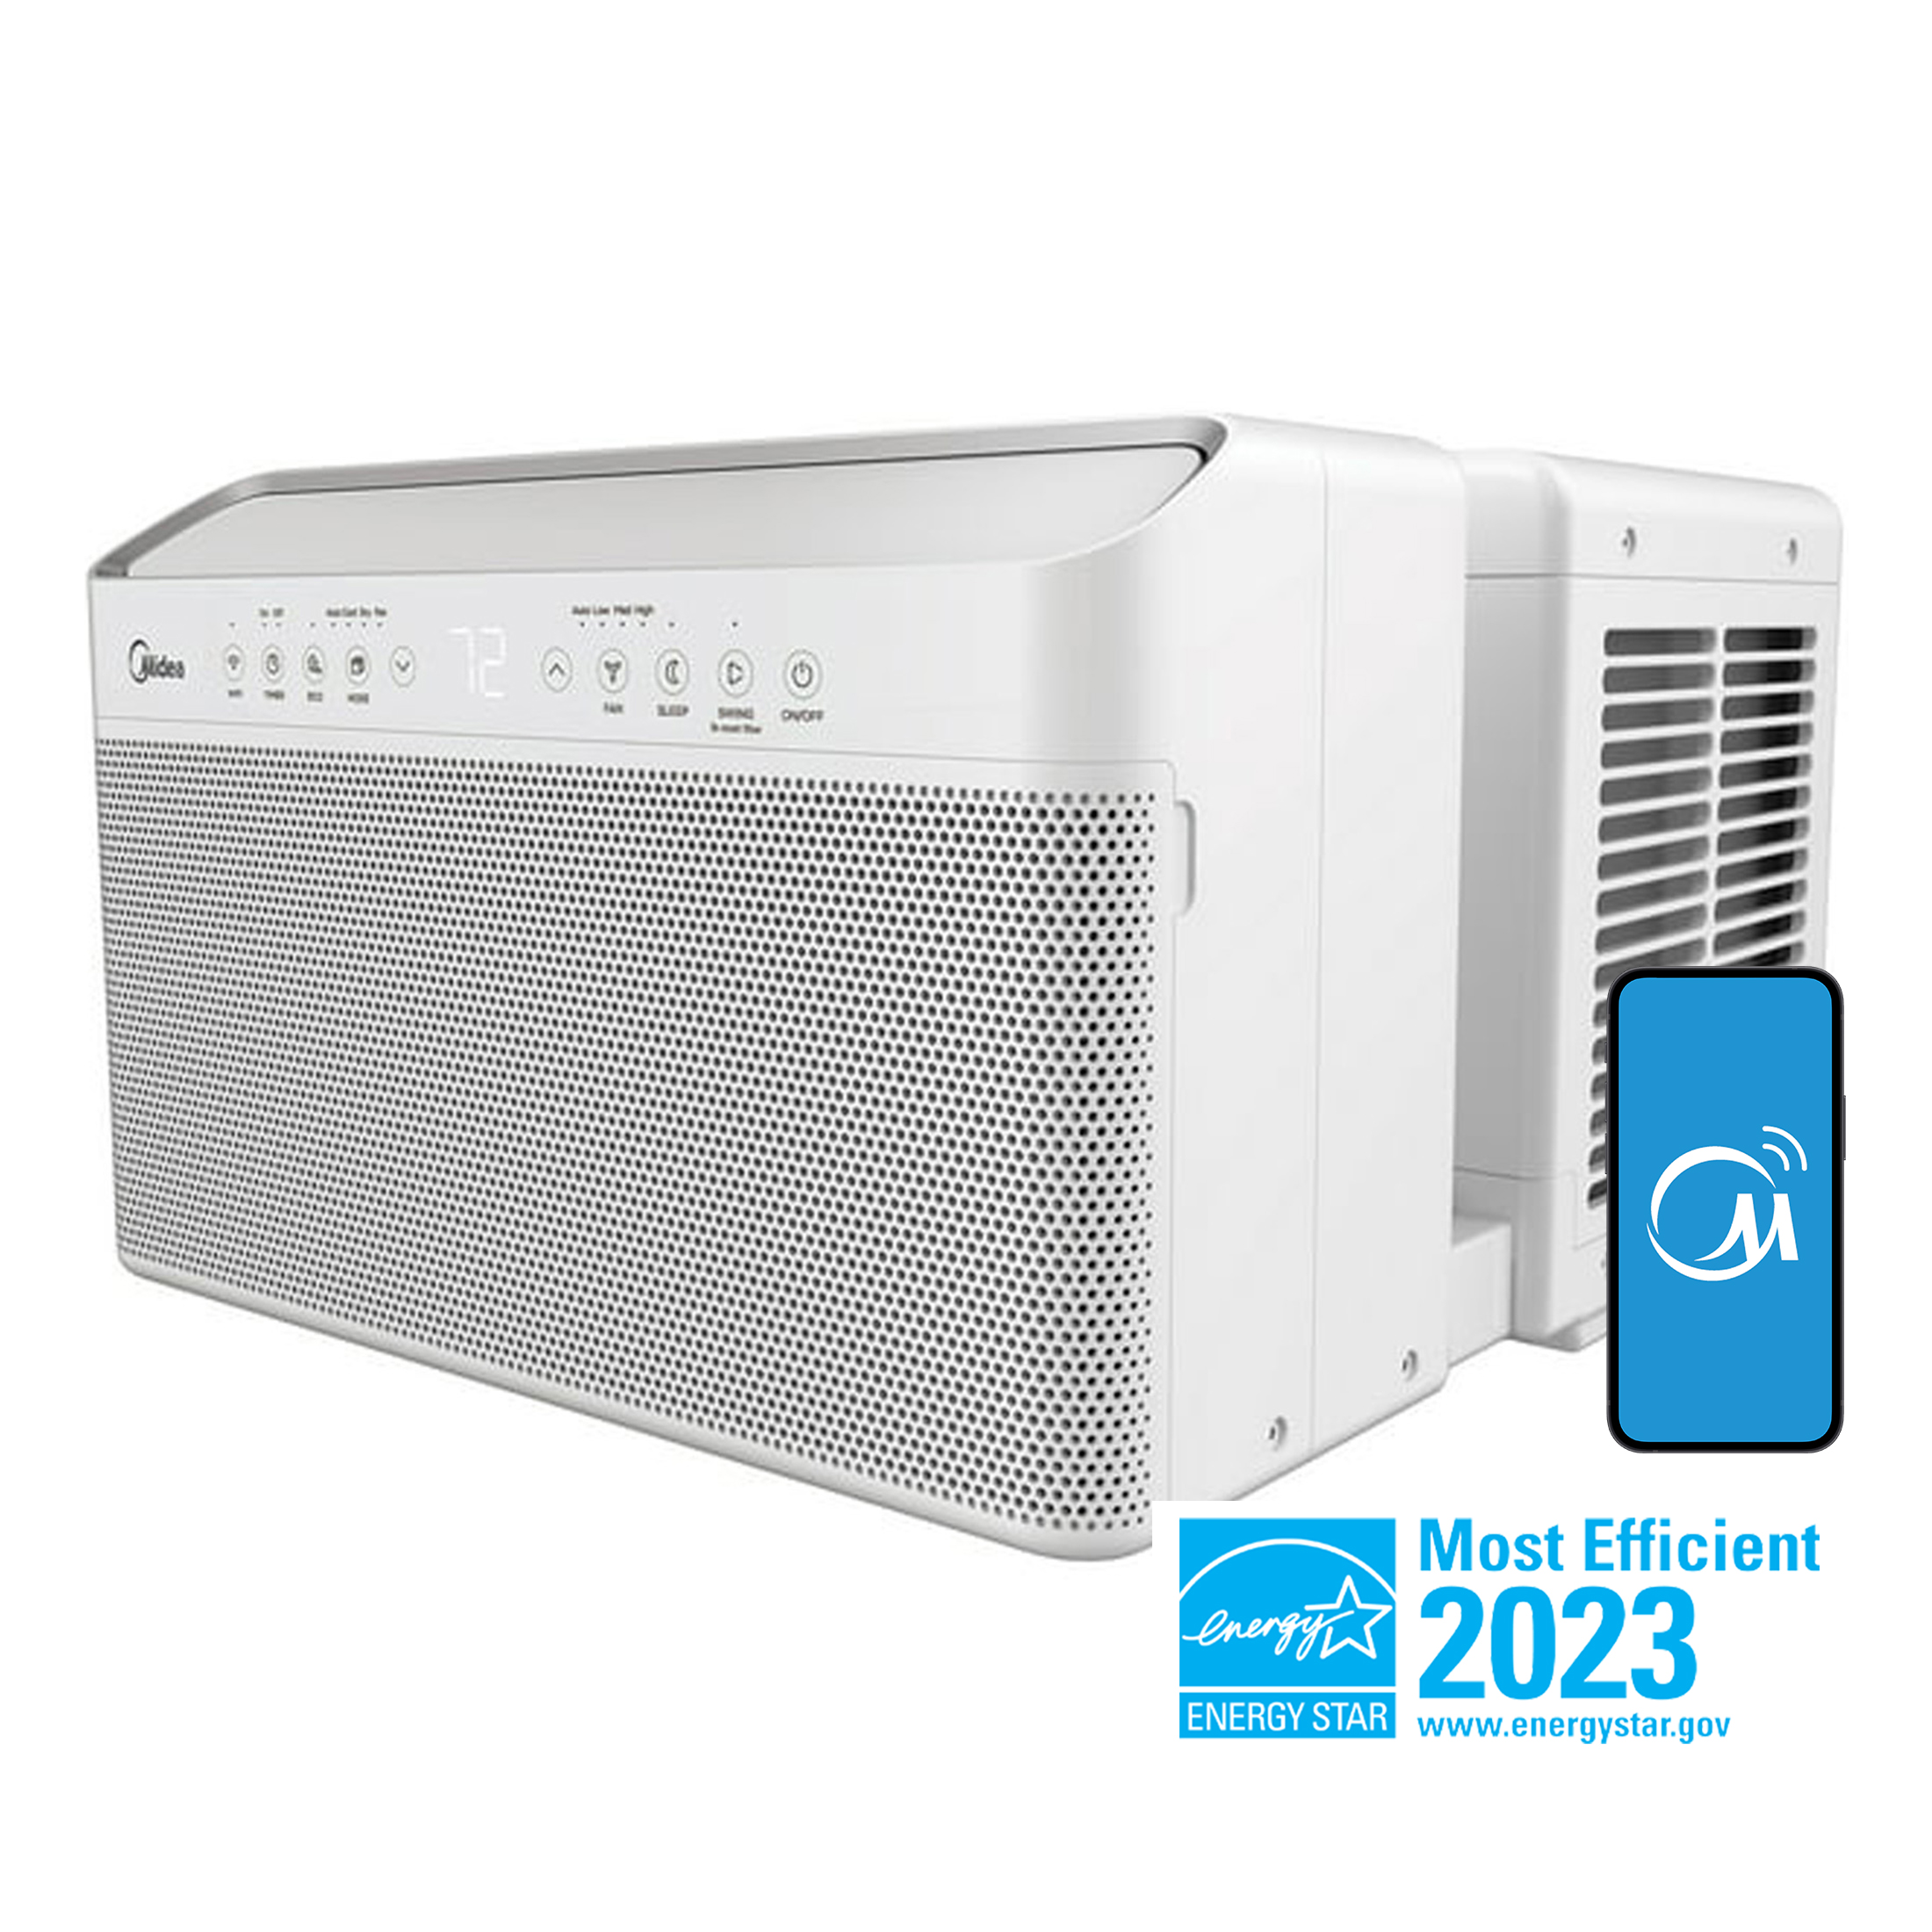 Midea 8,000 BTU Smart Inverter U-Shaped Window Air Conditioner, 35% Energy Savings, Extreme Quiet, up to 350 Sq. ft., MAW08V1QWT - image 4 of 20